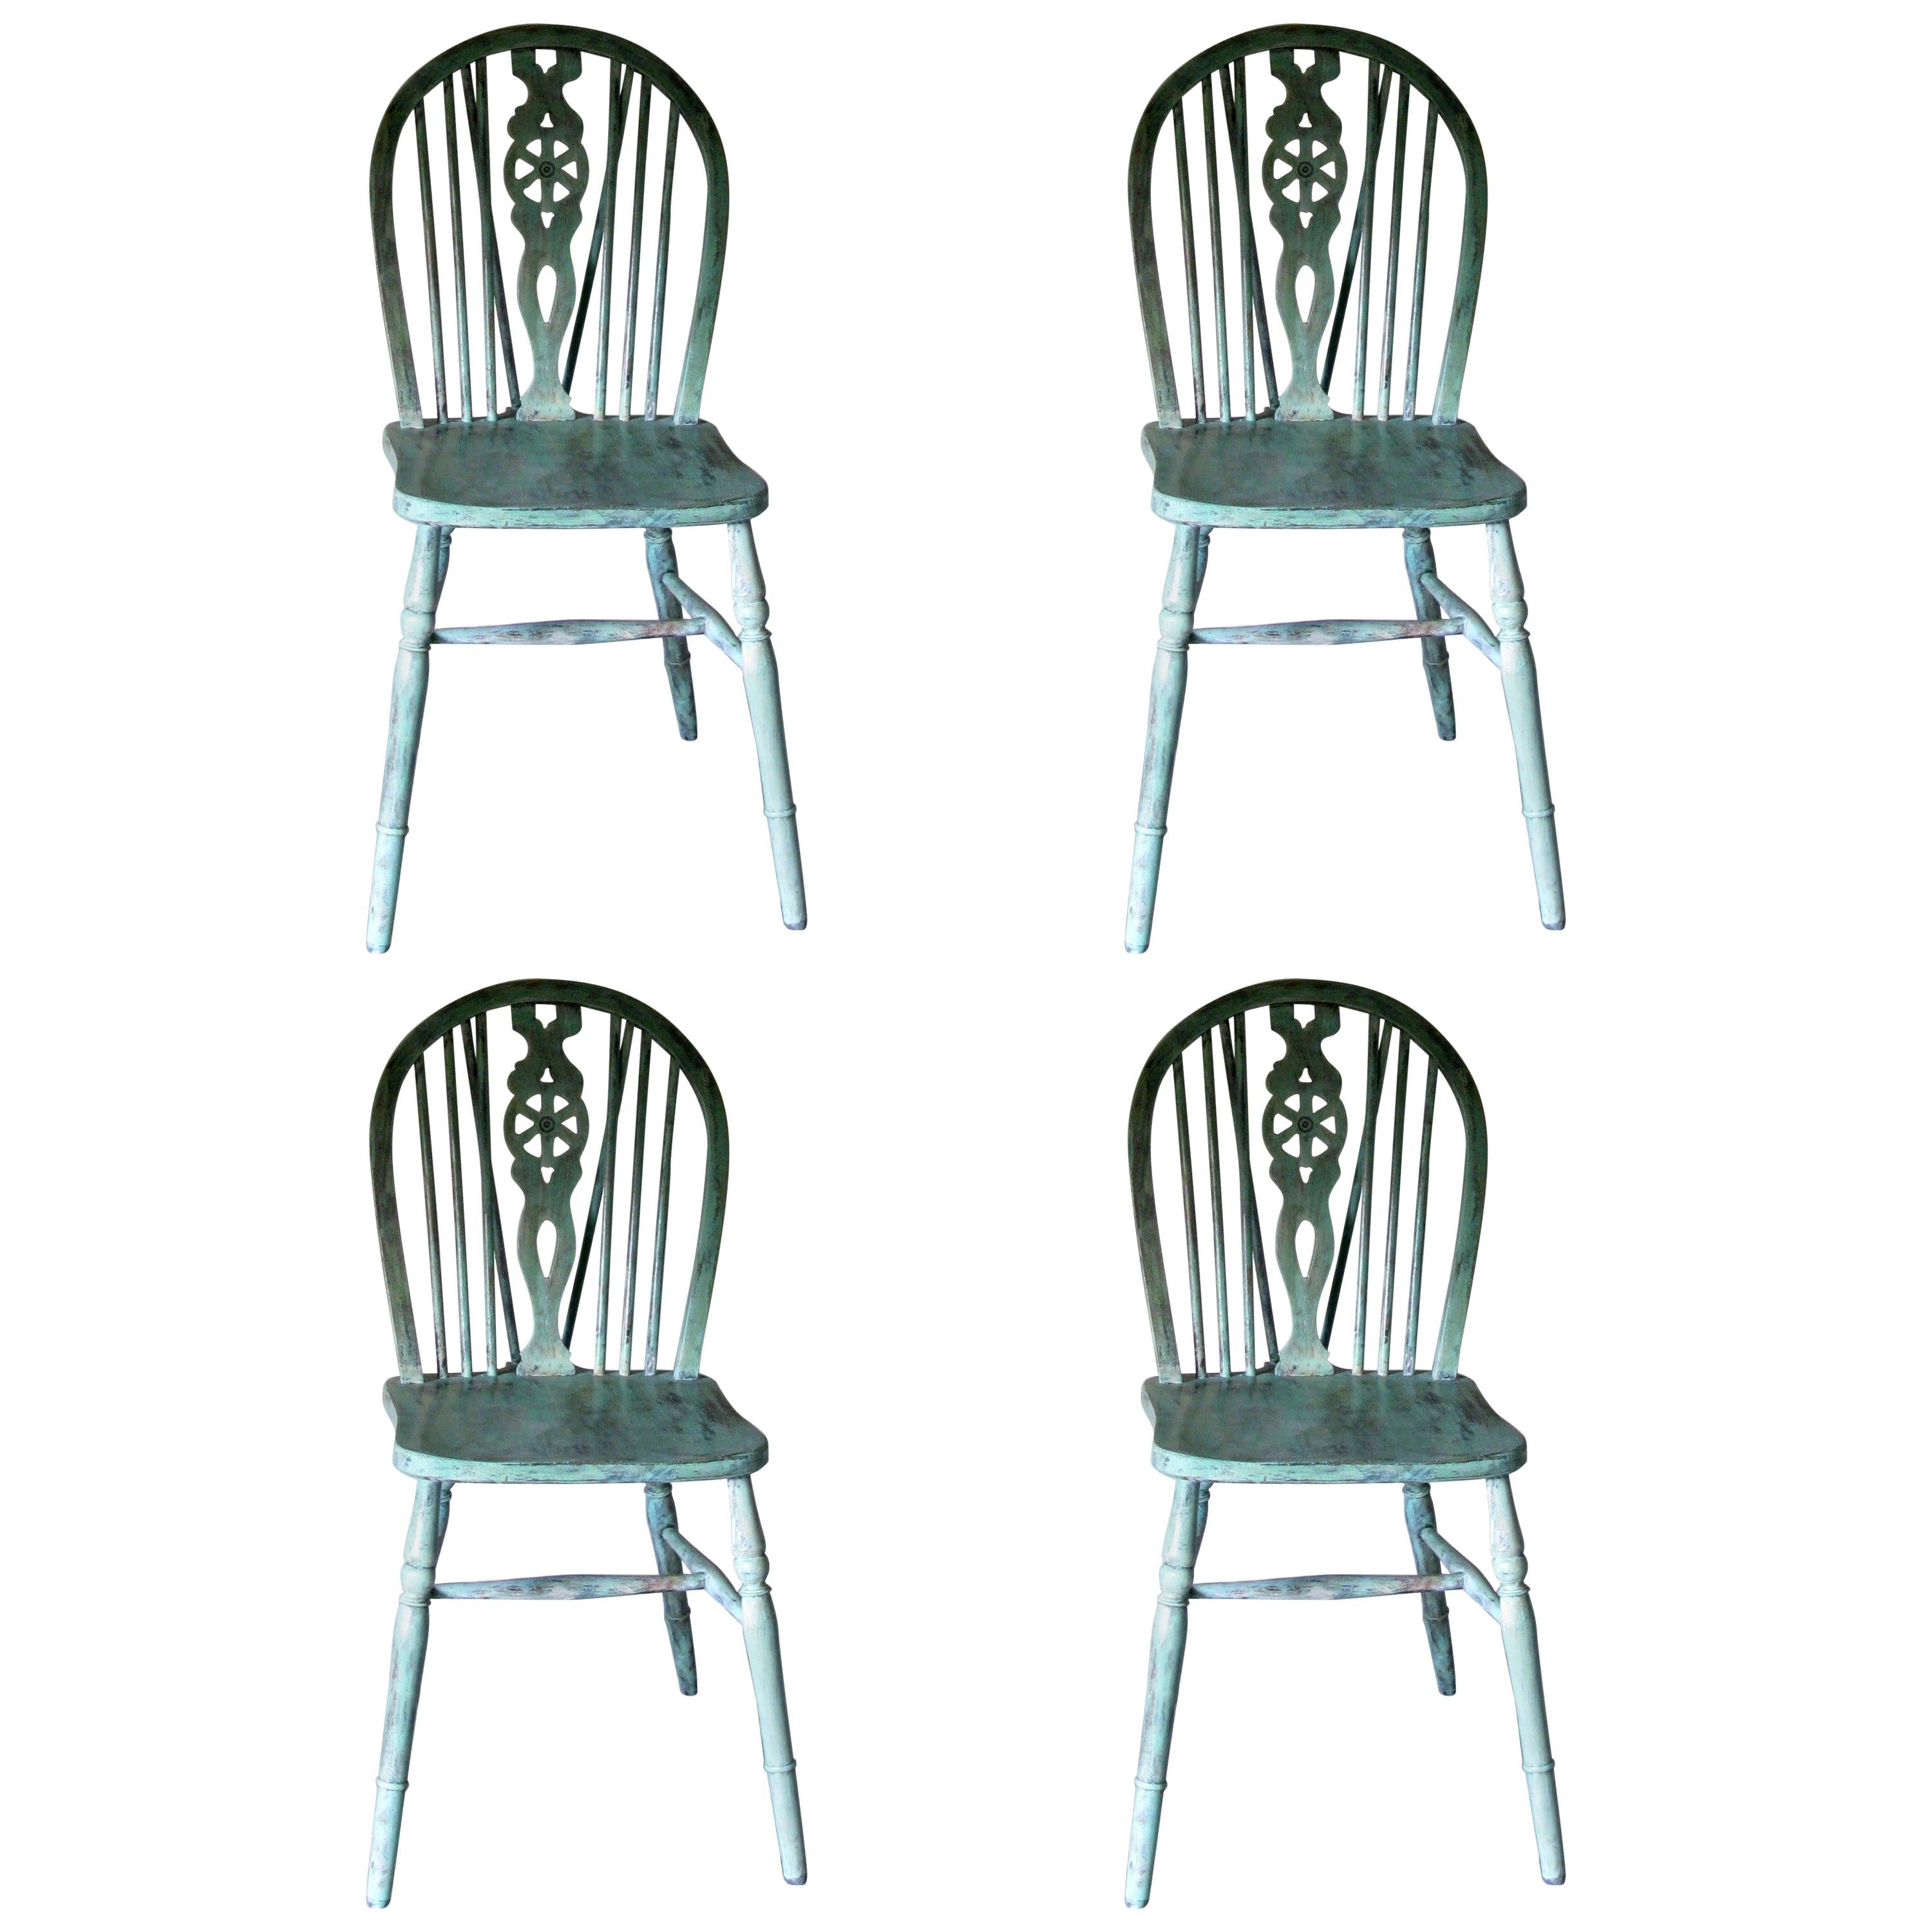 Set of 4 Windsor Chairs, English, Antique Windsor Chairs, Decorative, Painted For Sale